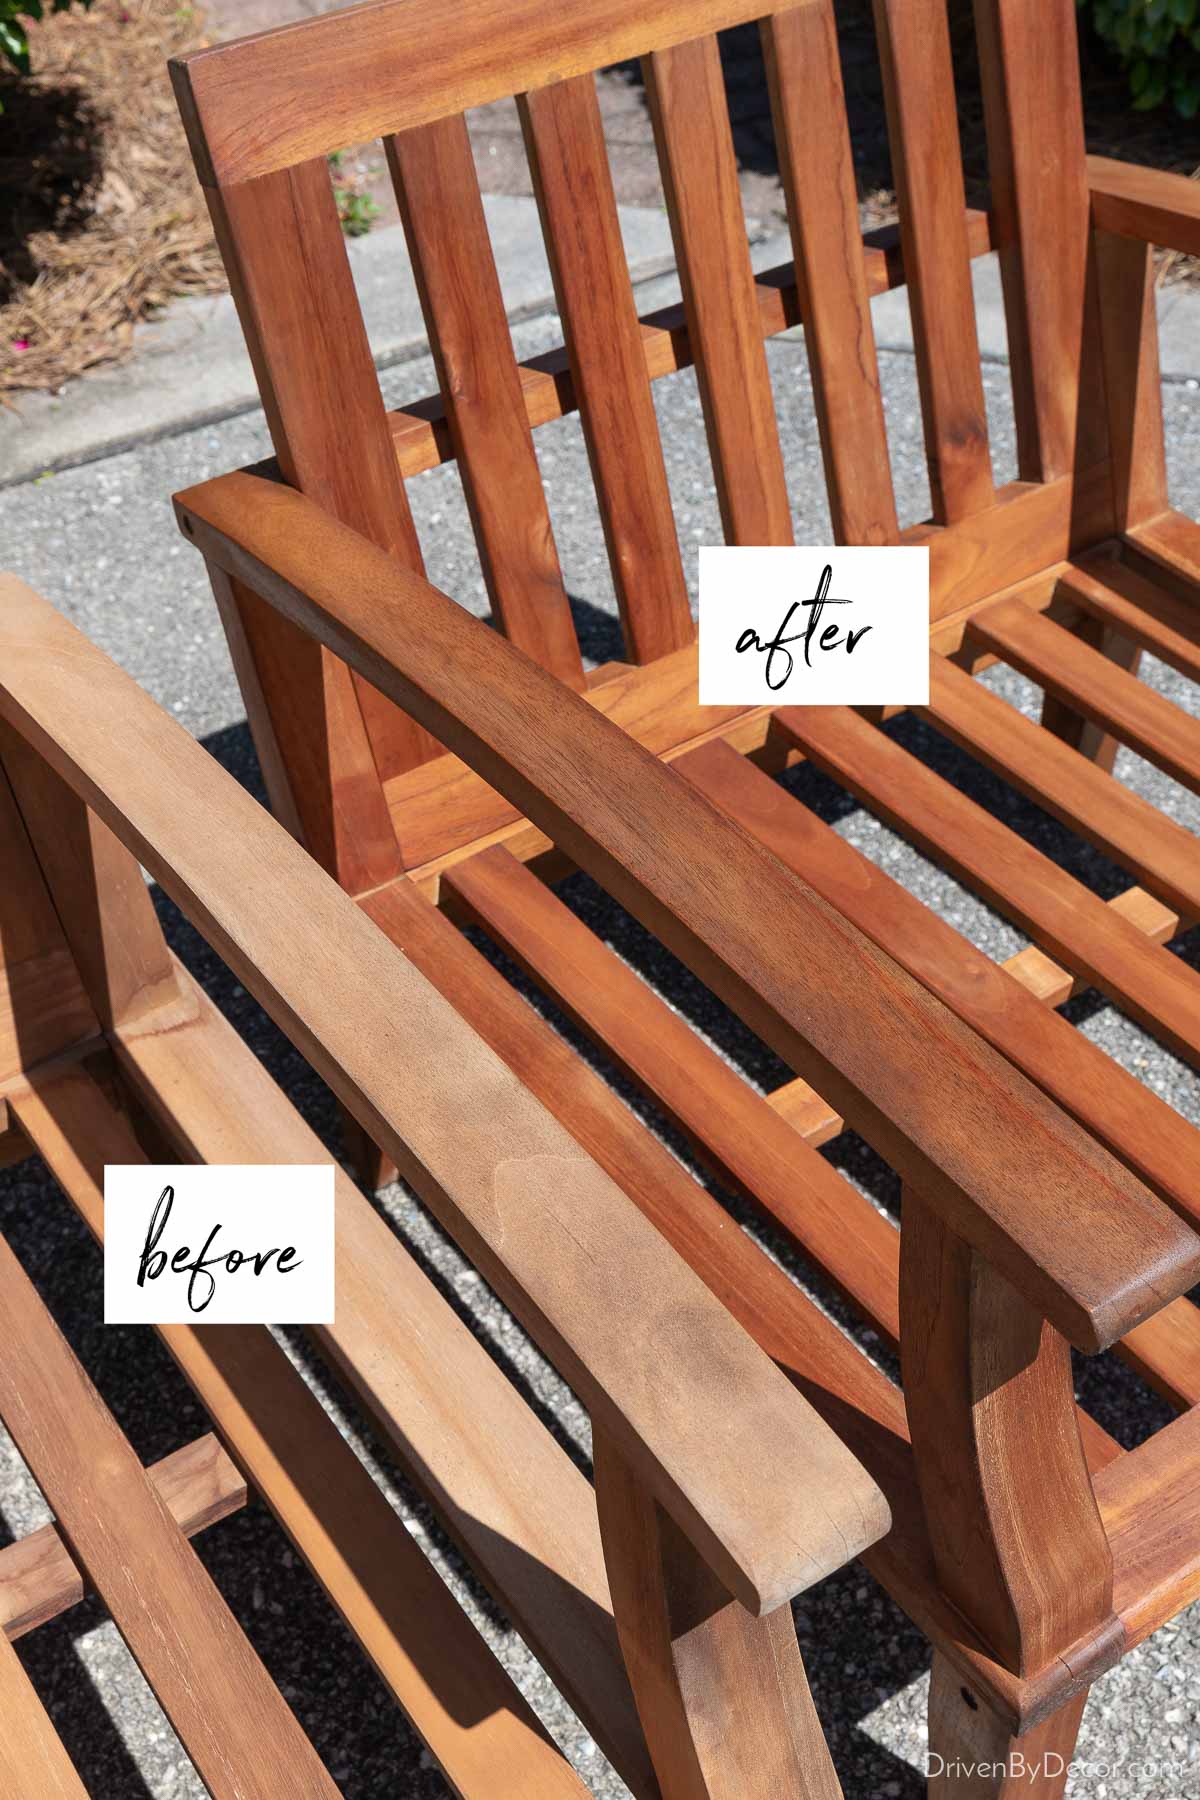 One teak chair before being conditioned and other after conditioning